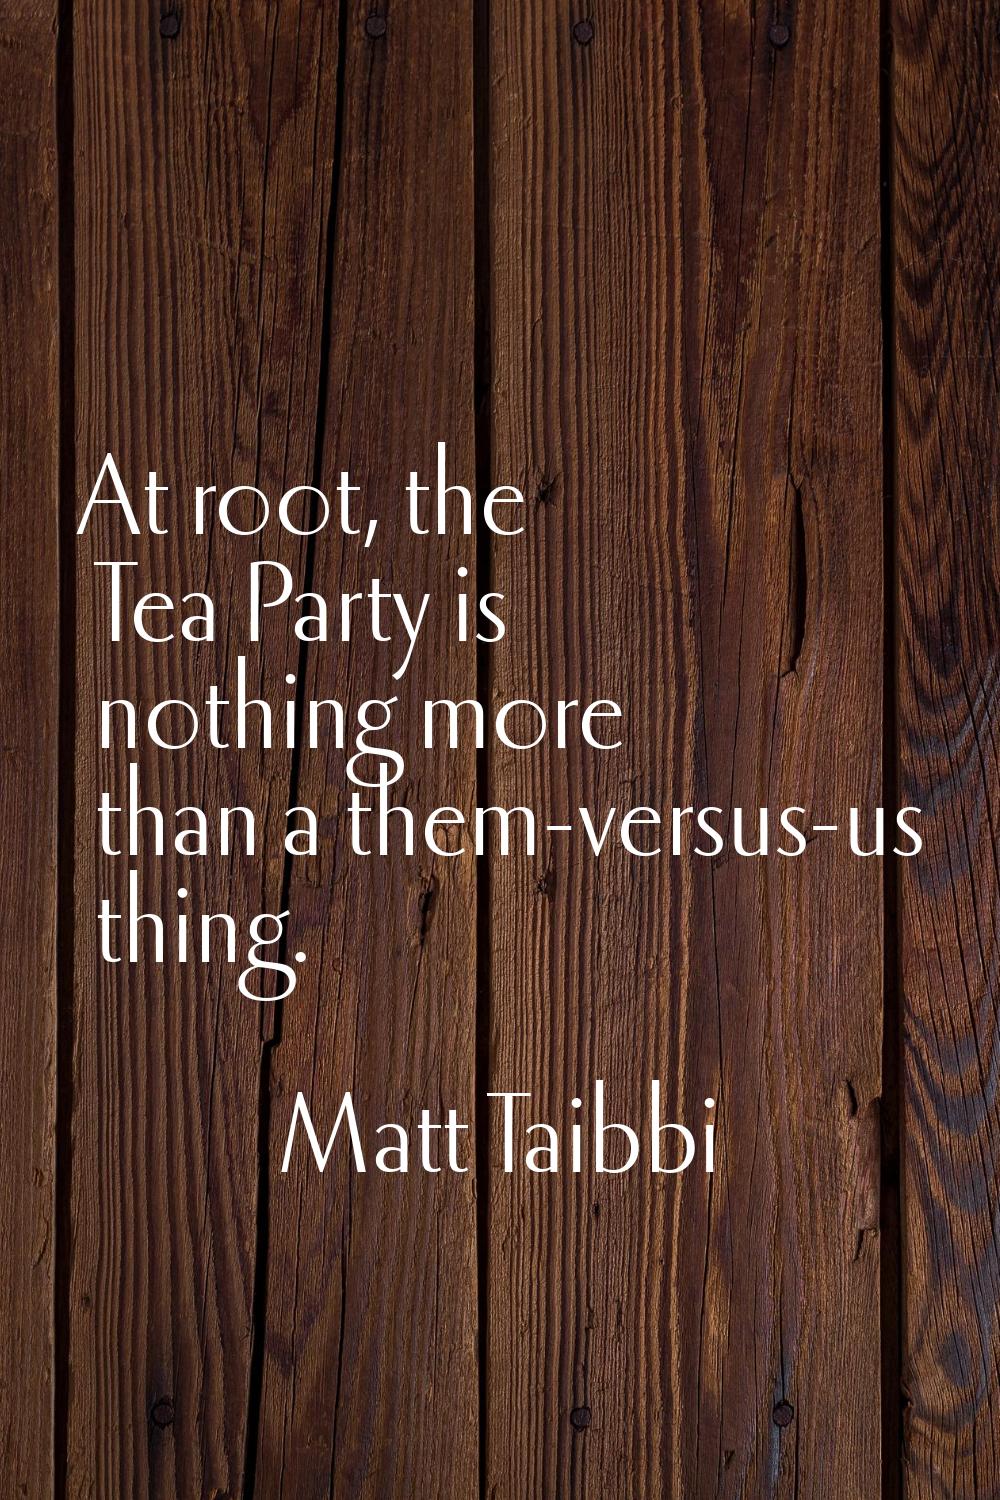 At root, the Tea Party is nothing more than a them-versus-us thing.